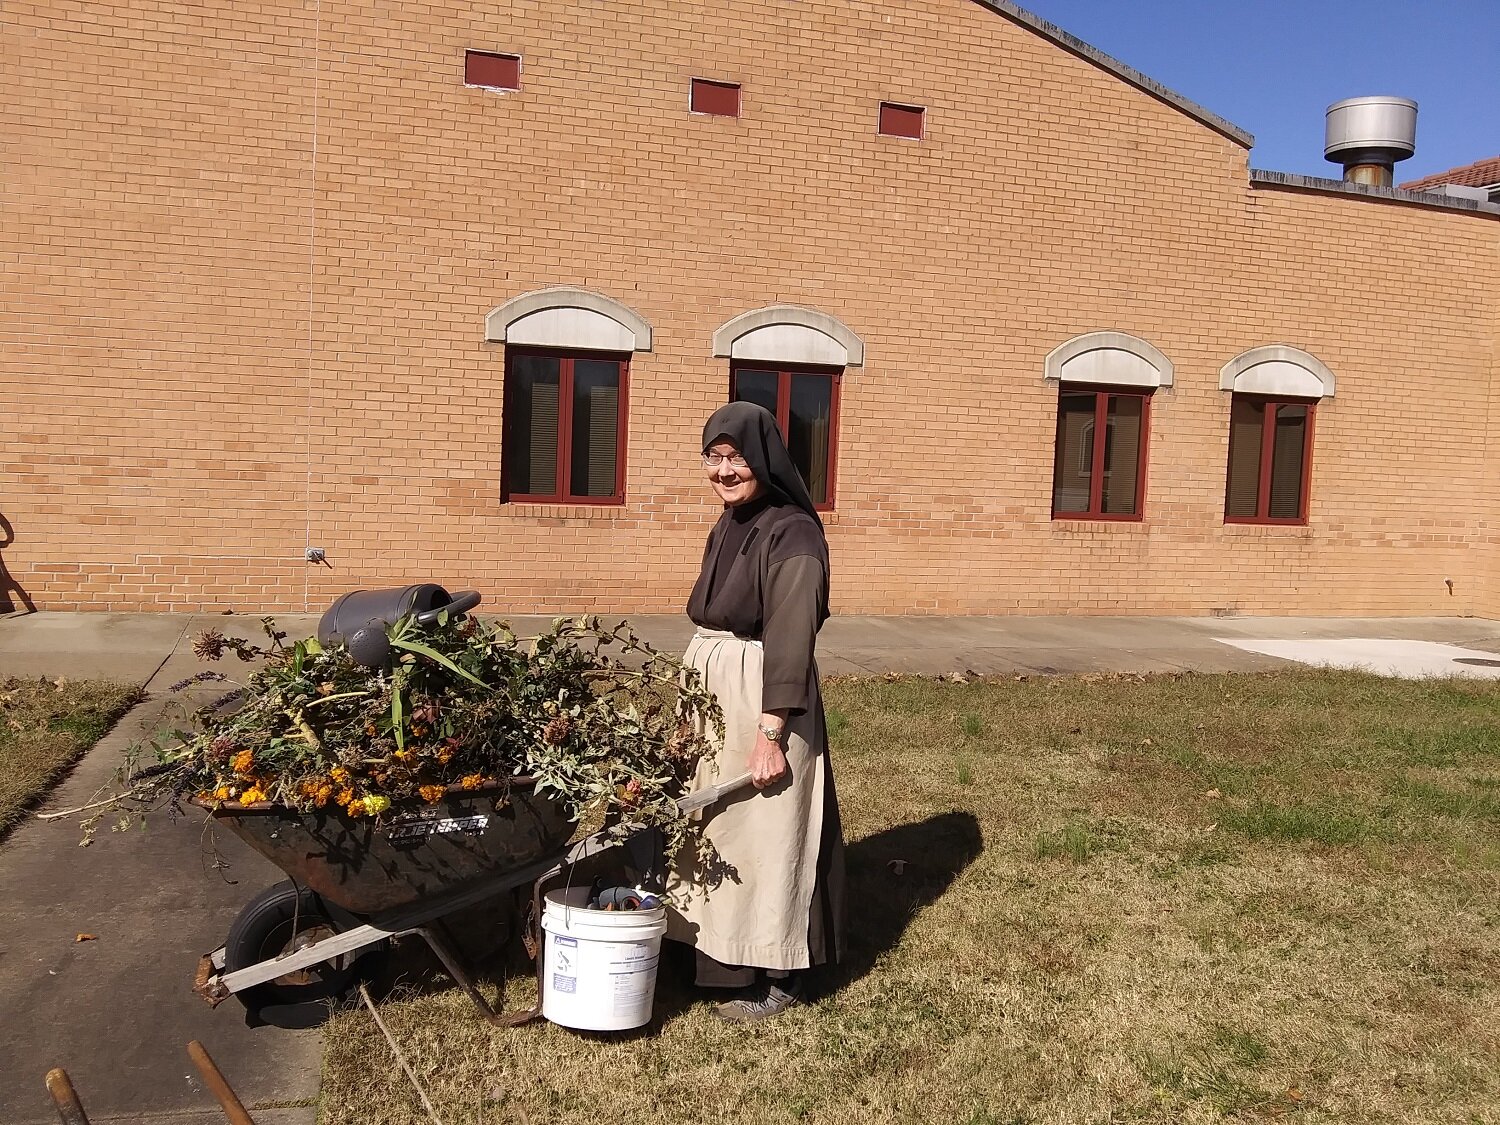  Sister Mary Veronica really had a busy afternoon “winterizing” gardens! 